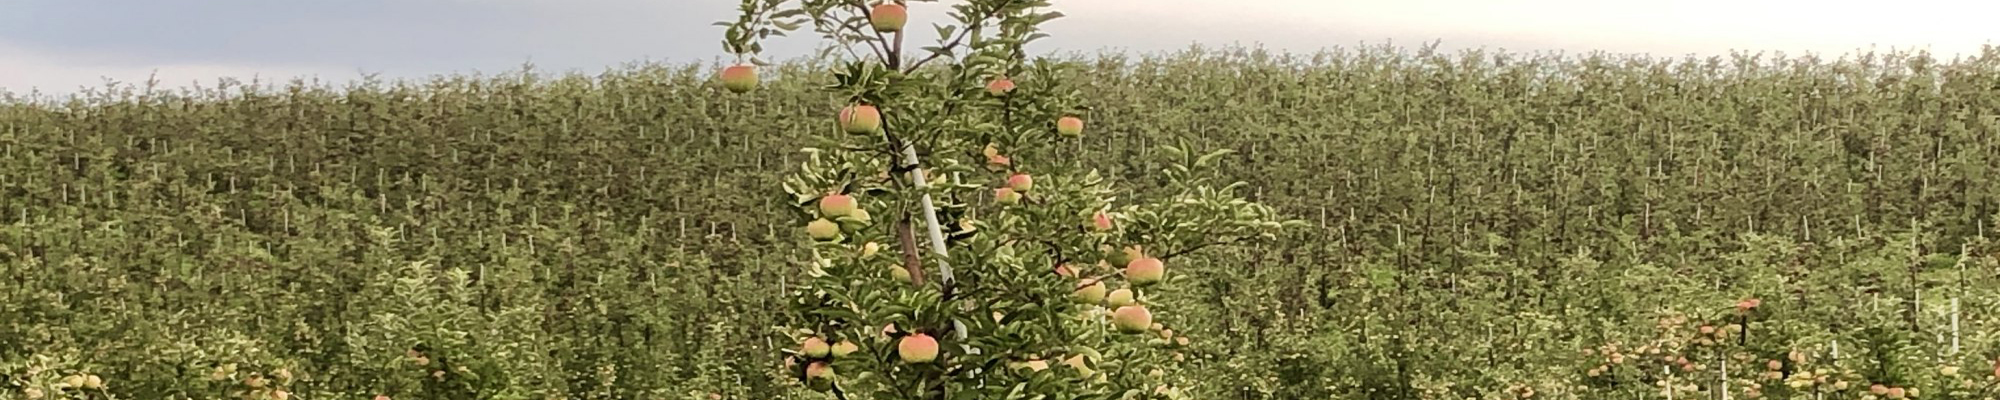 Frequently Asked Questions about apples - Gays Mills, WI | Sunrise Orchards, Inc.